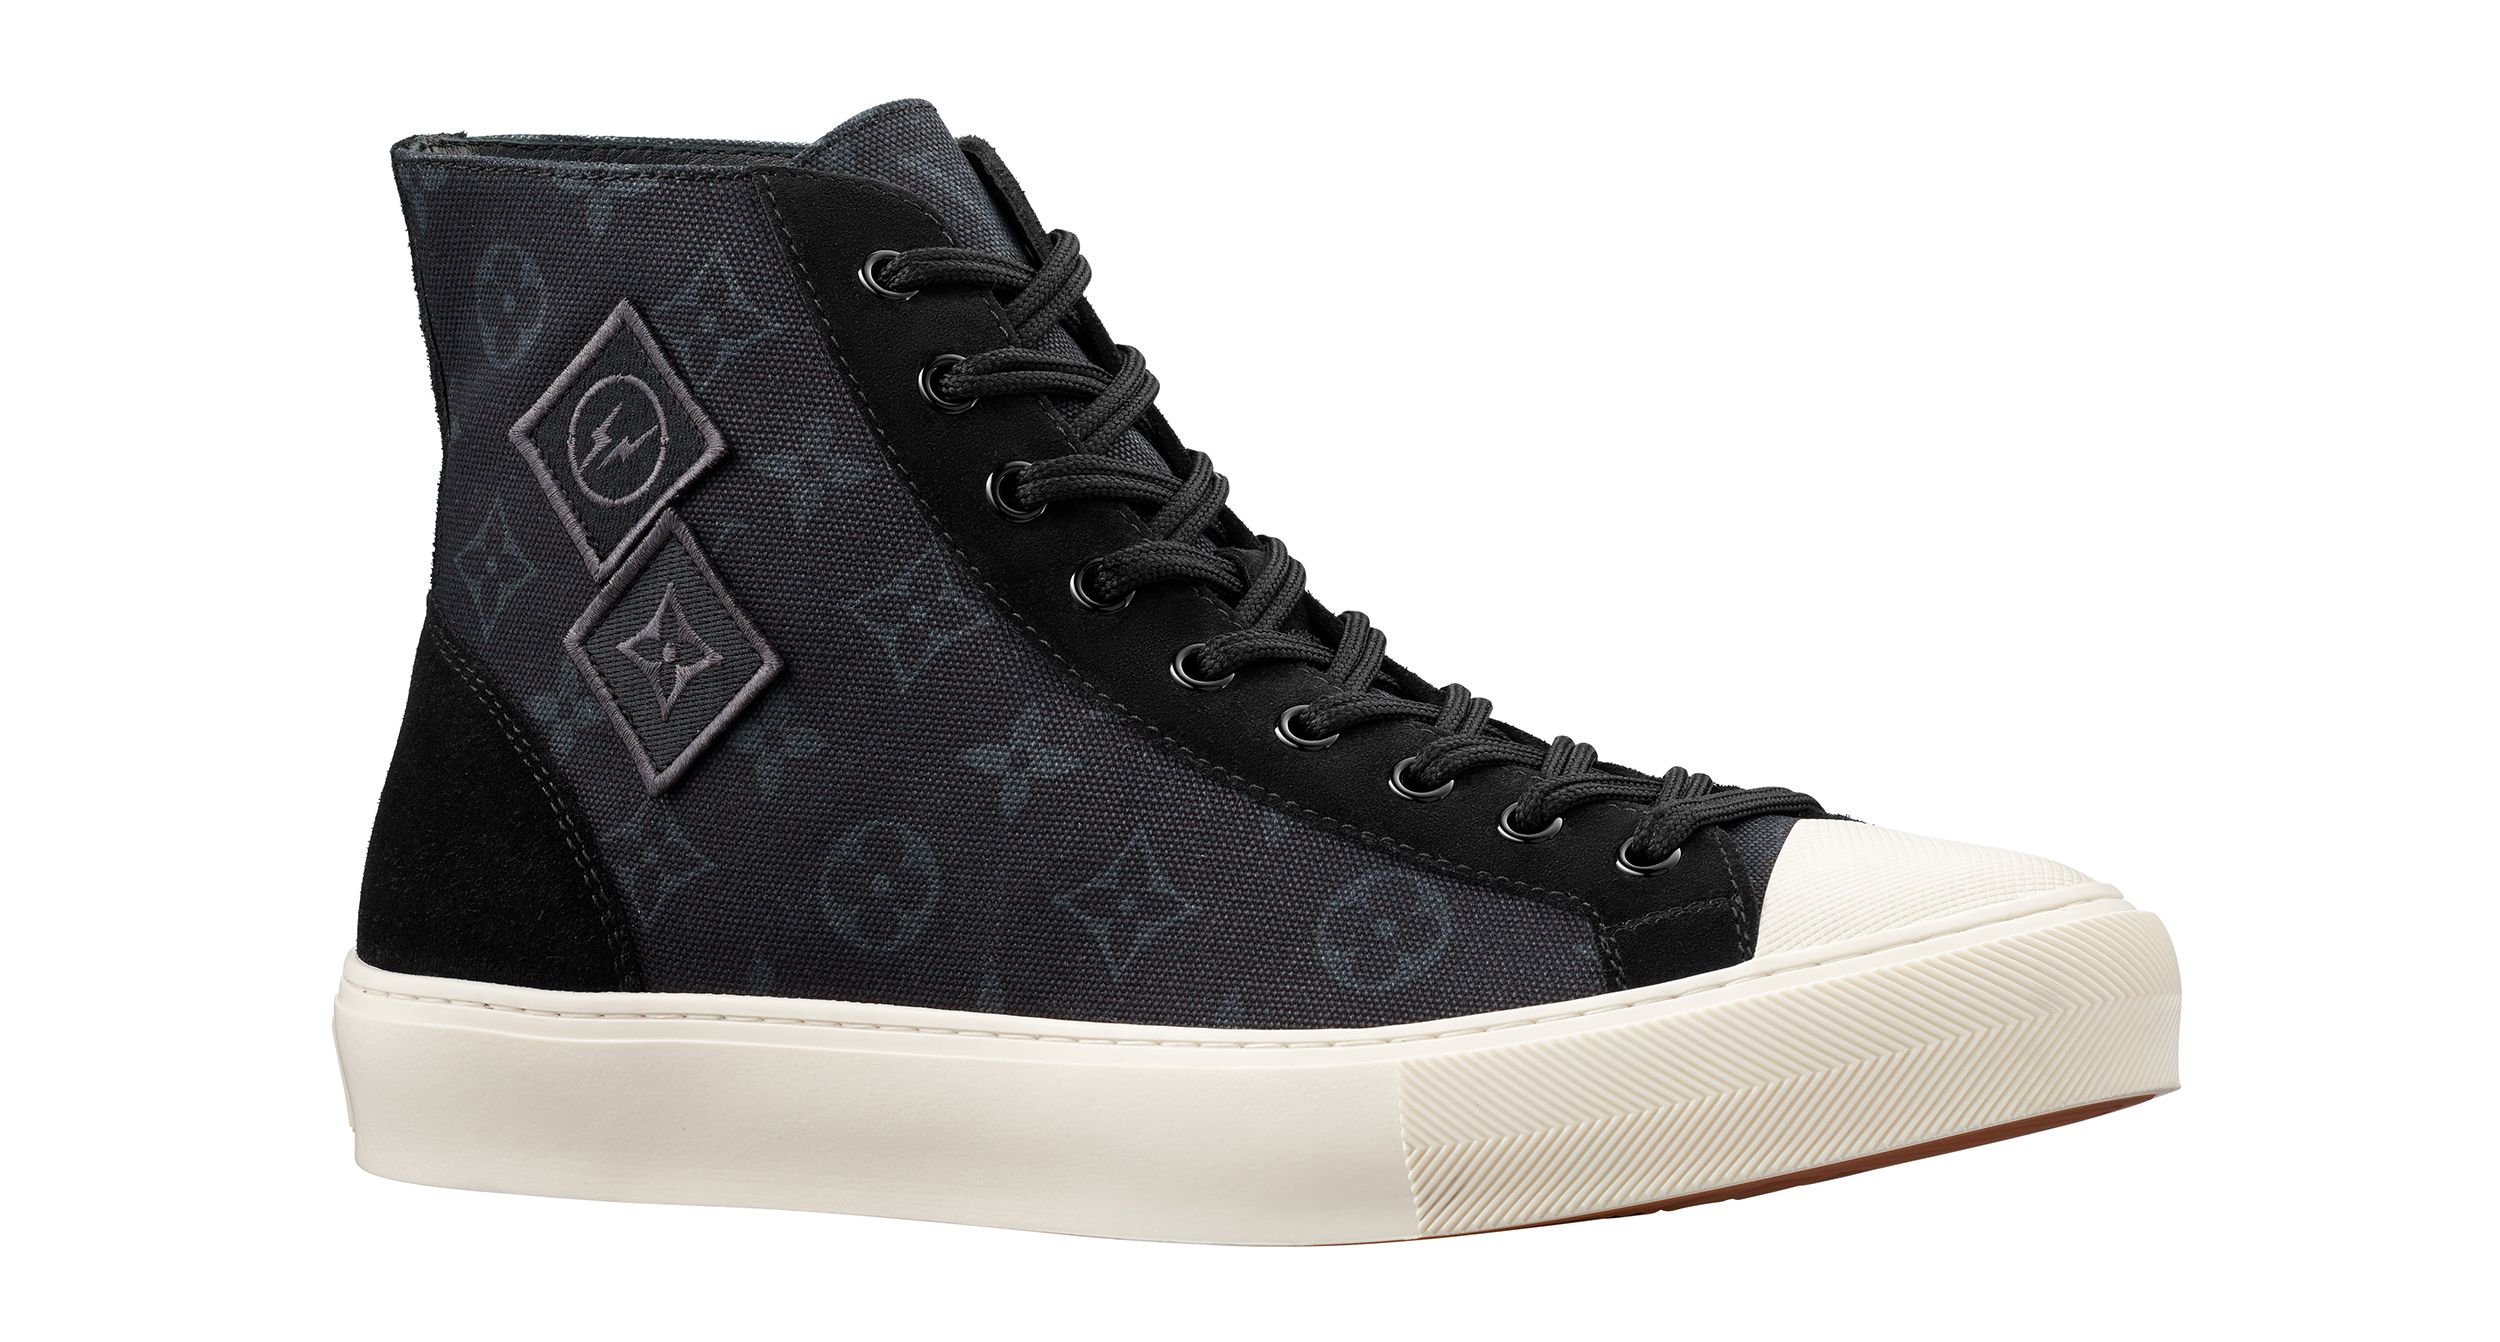 Here's the fragment design x Louis Vuitton Collaboration Full